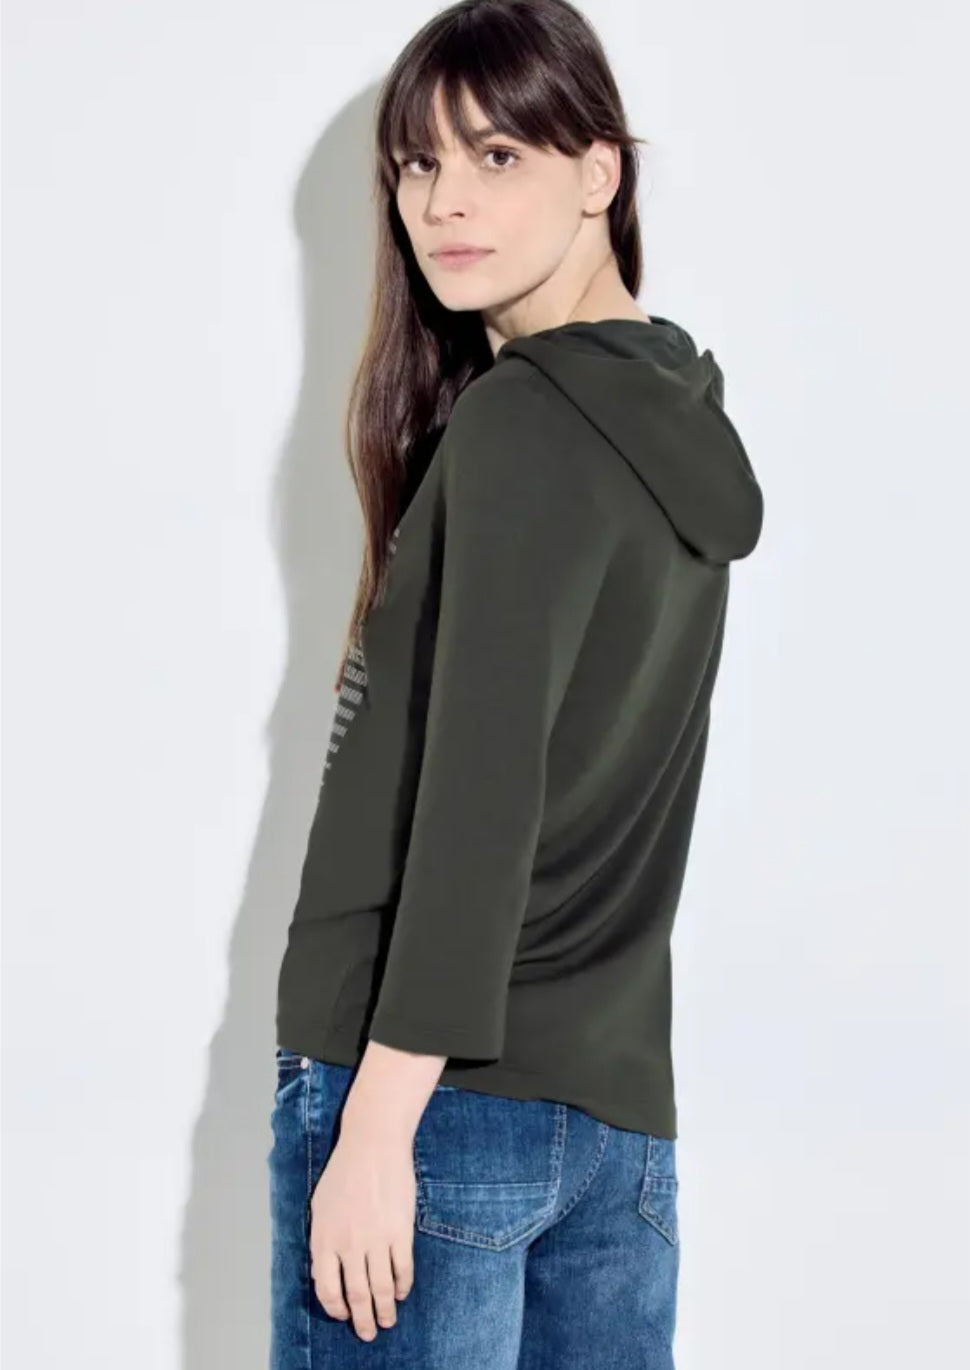 CECIL 'Stay You' Hoodie